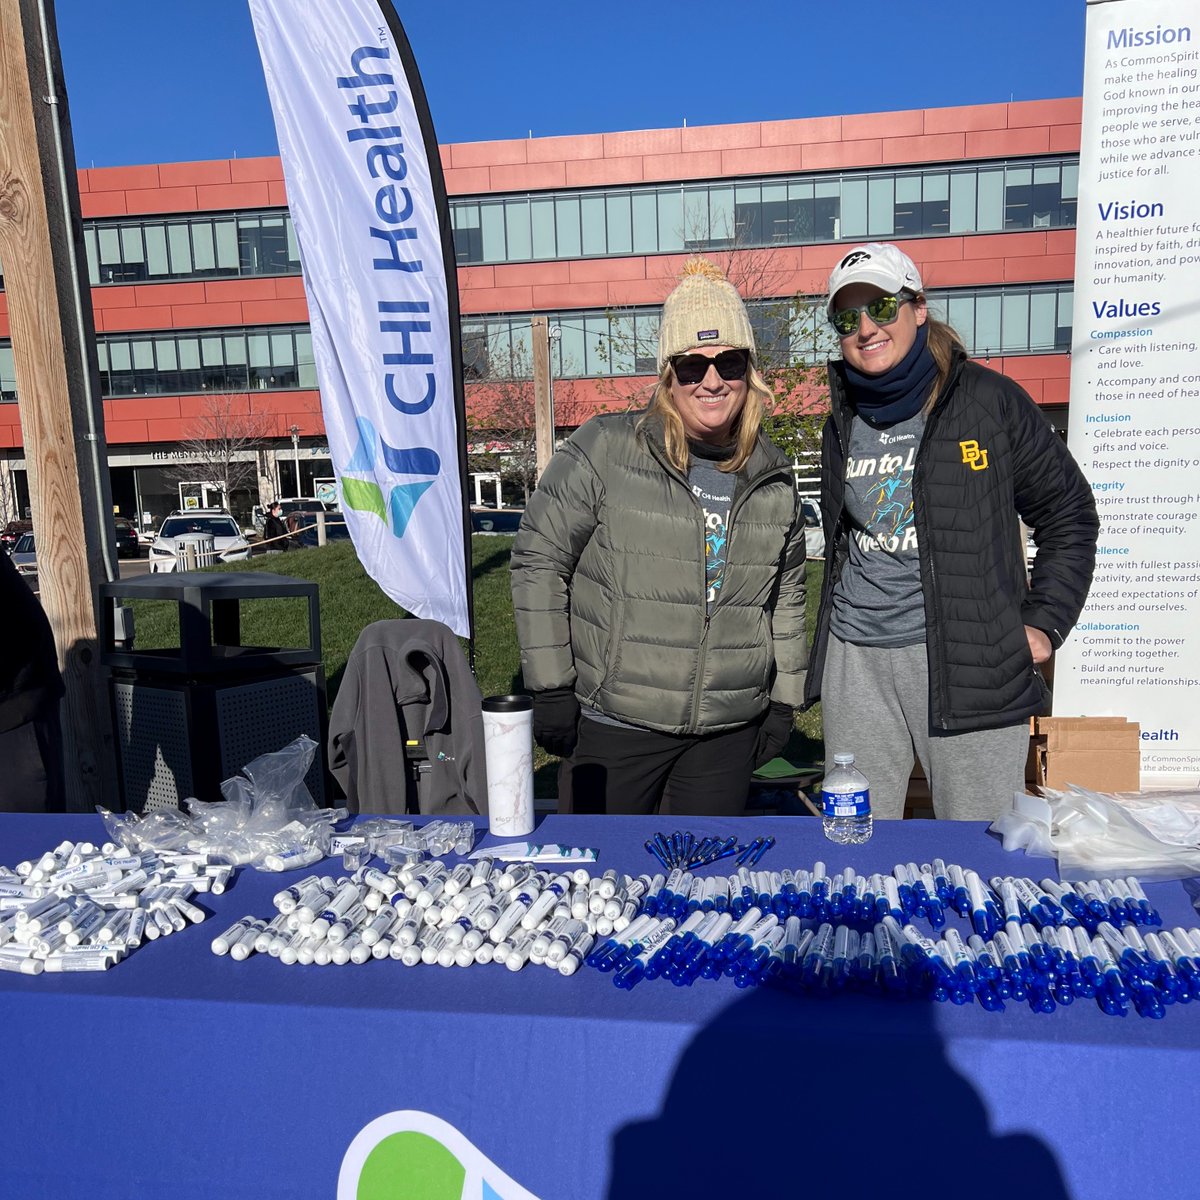 CHI Health sponsored the 43rd Annual Corporate Cup Run, hosted by the American Lung Association, in Omaha. We had a team of 315 employees and family members walk/run at the event on Sunday, April 21. Our team raised over $2000 for the mission of the American Lung Association!